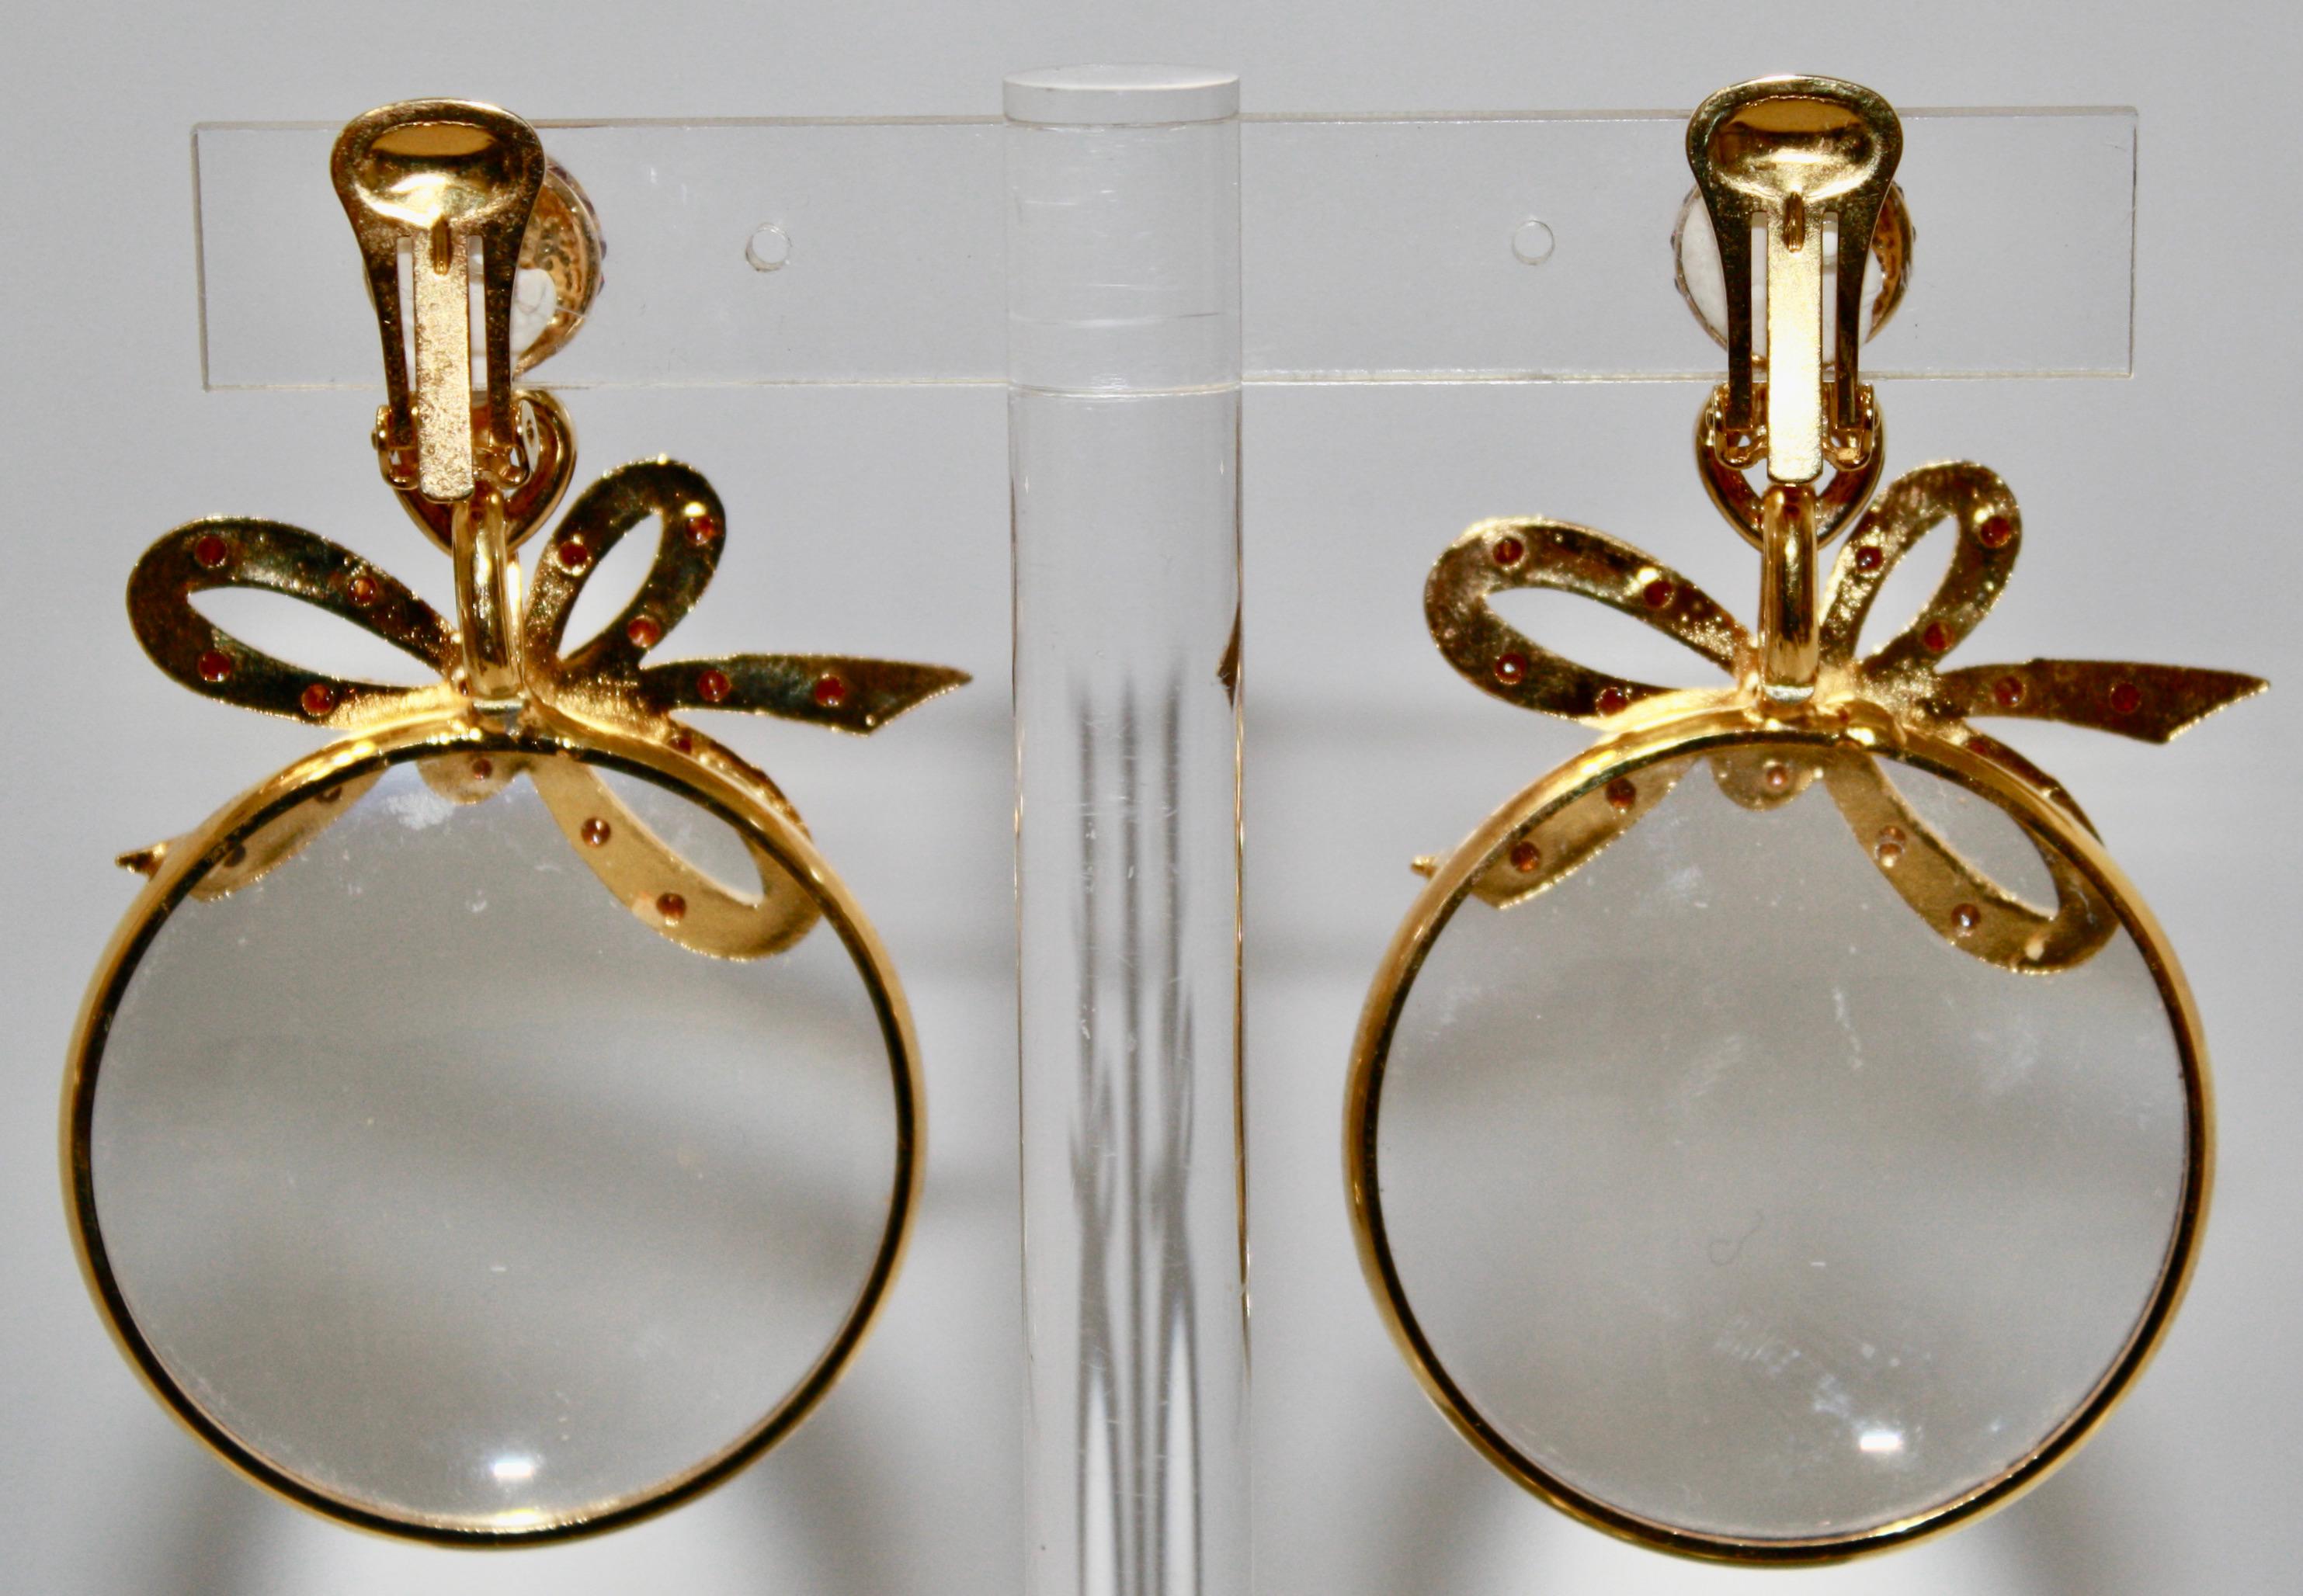 Statement earring in gilded metal of Vintage origin. Made in the 1980s with a bow motif reminiscent of Chanel. Round loupe is circled in gold